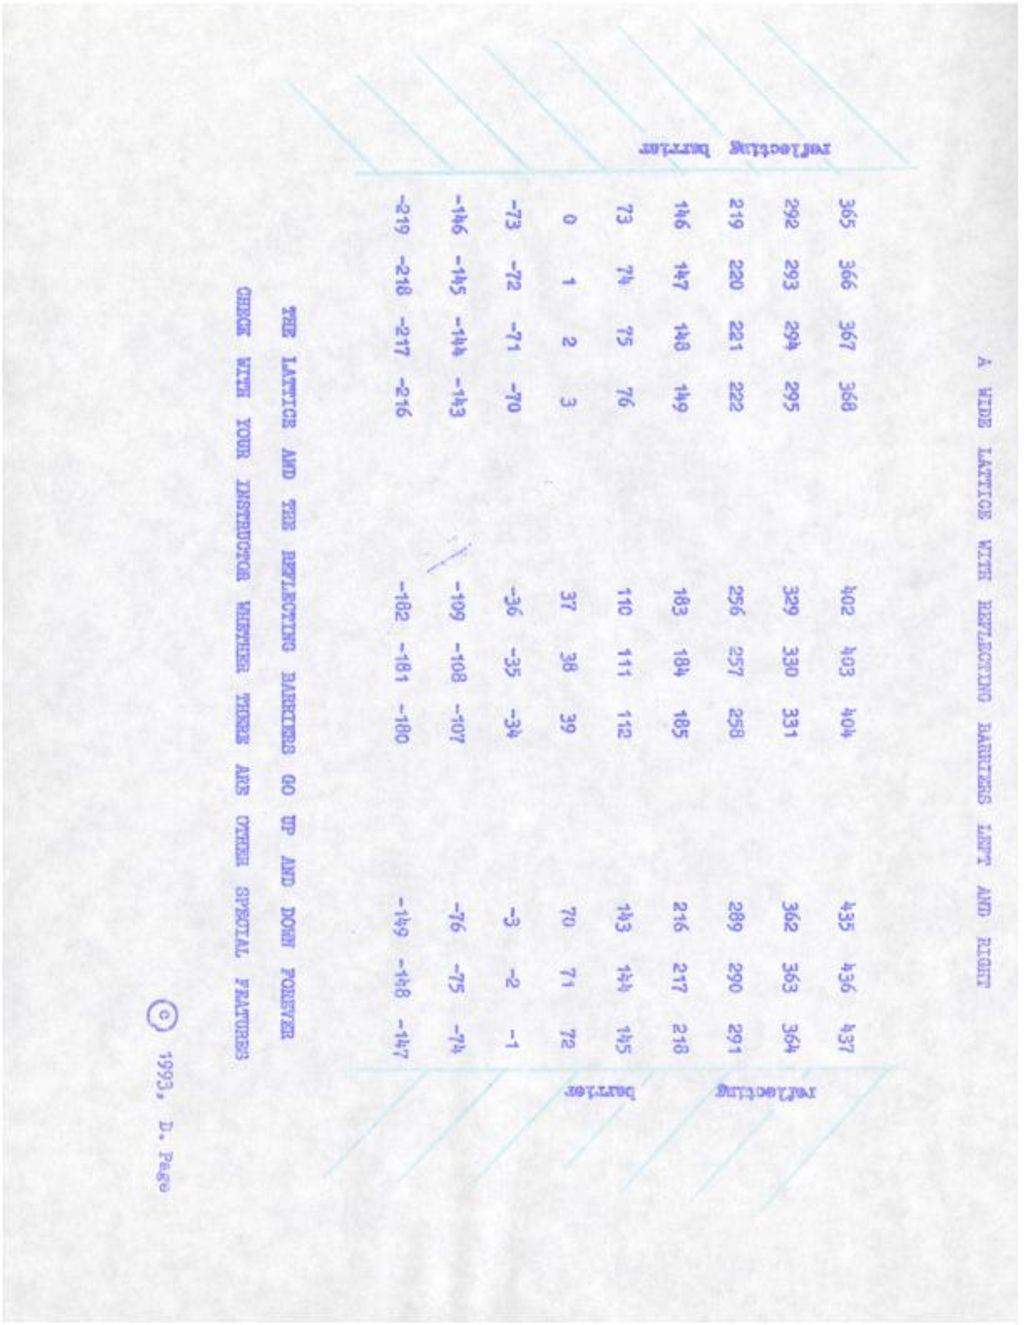 Miniature of A Wide Lattice with Reflecting Barriers Left and Right (73-lattice only) (1993)